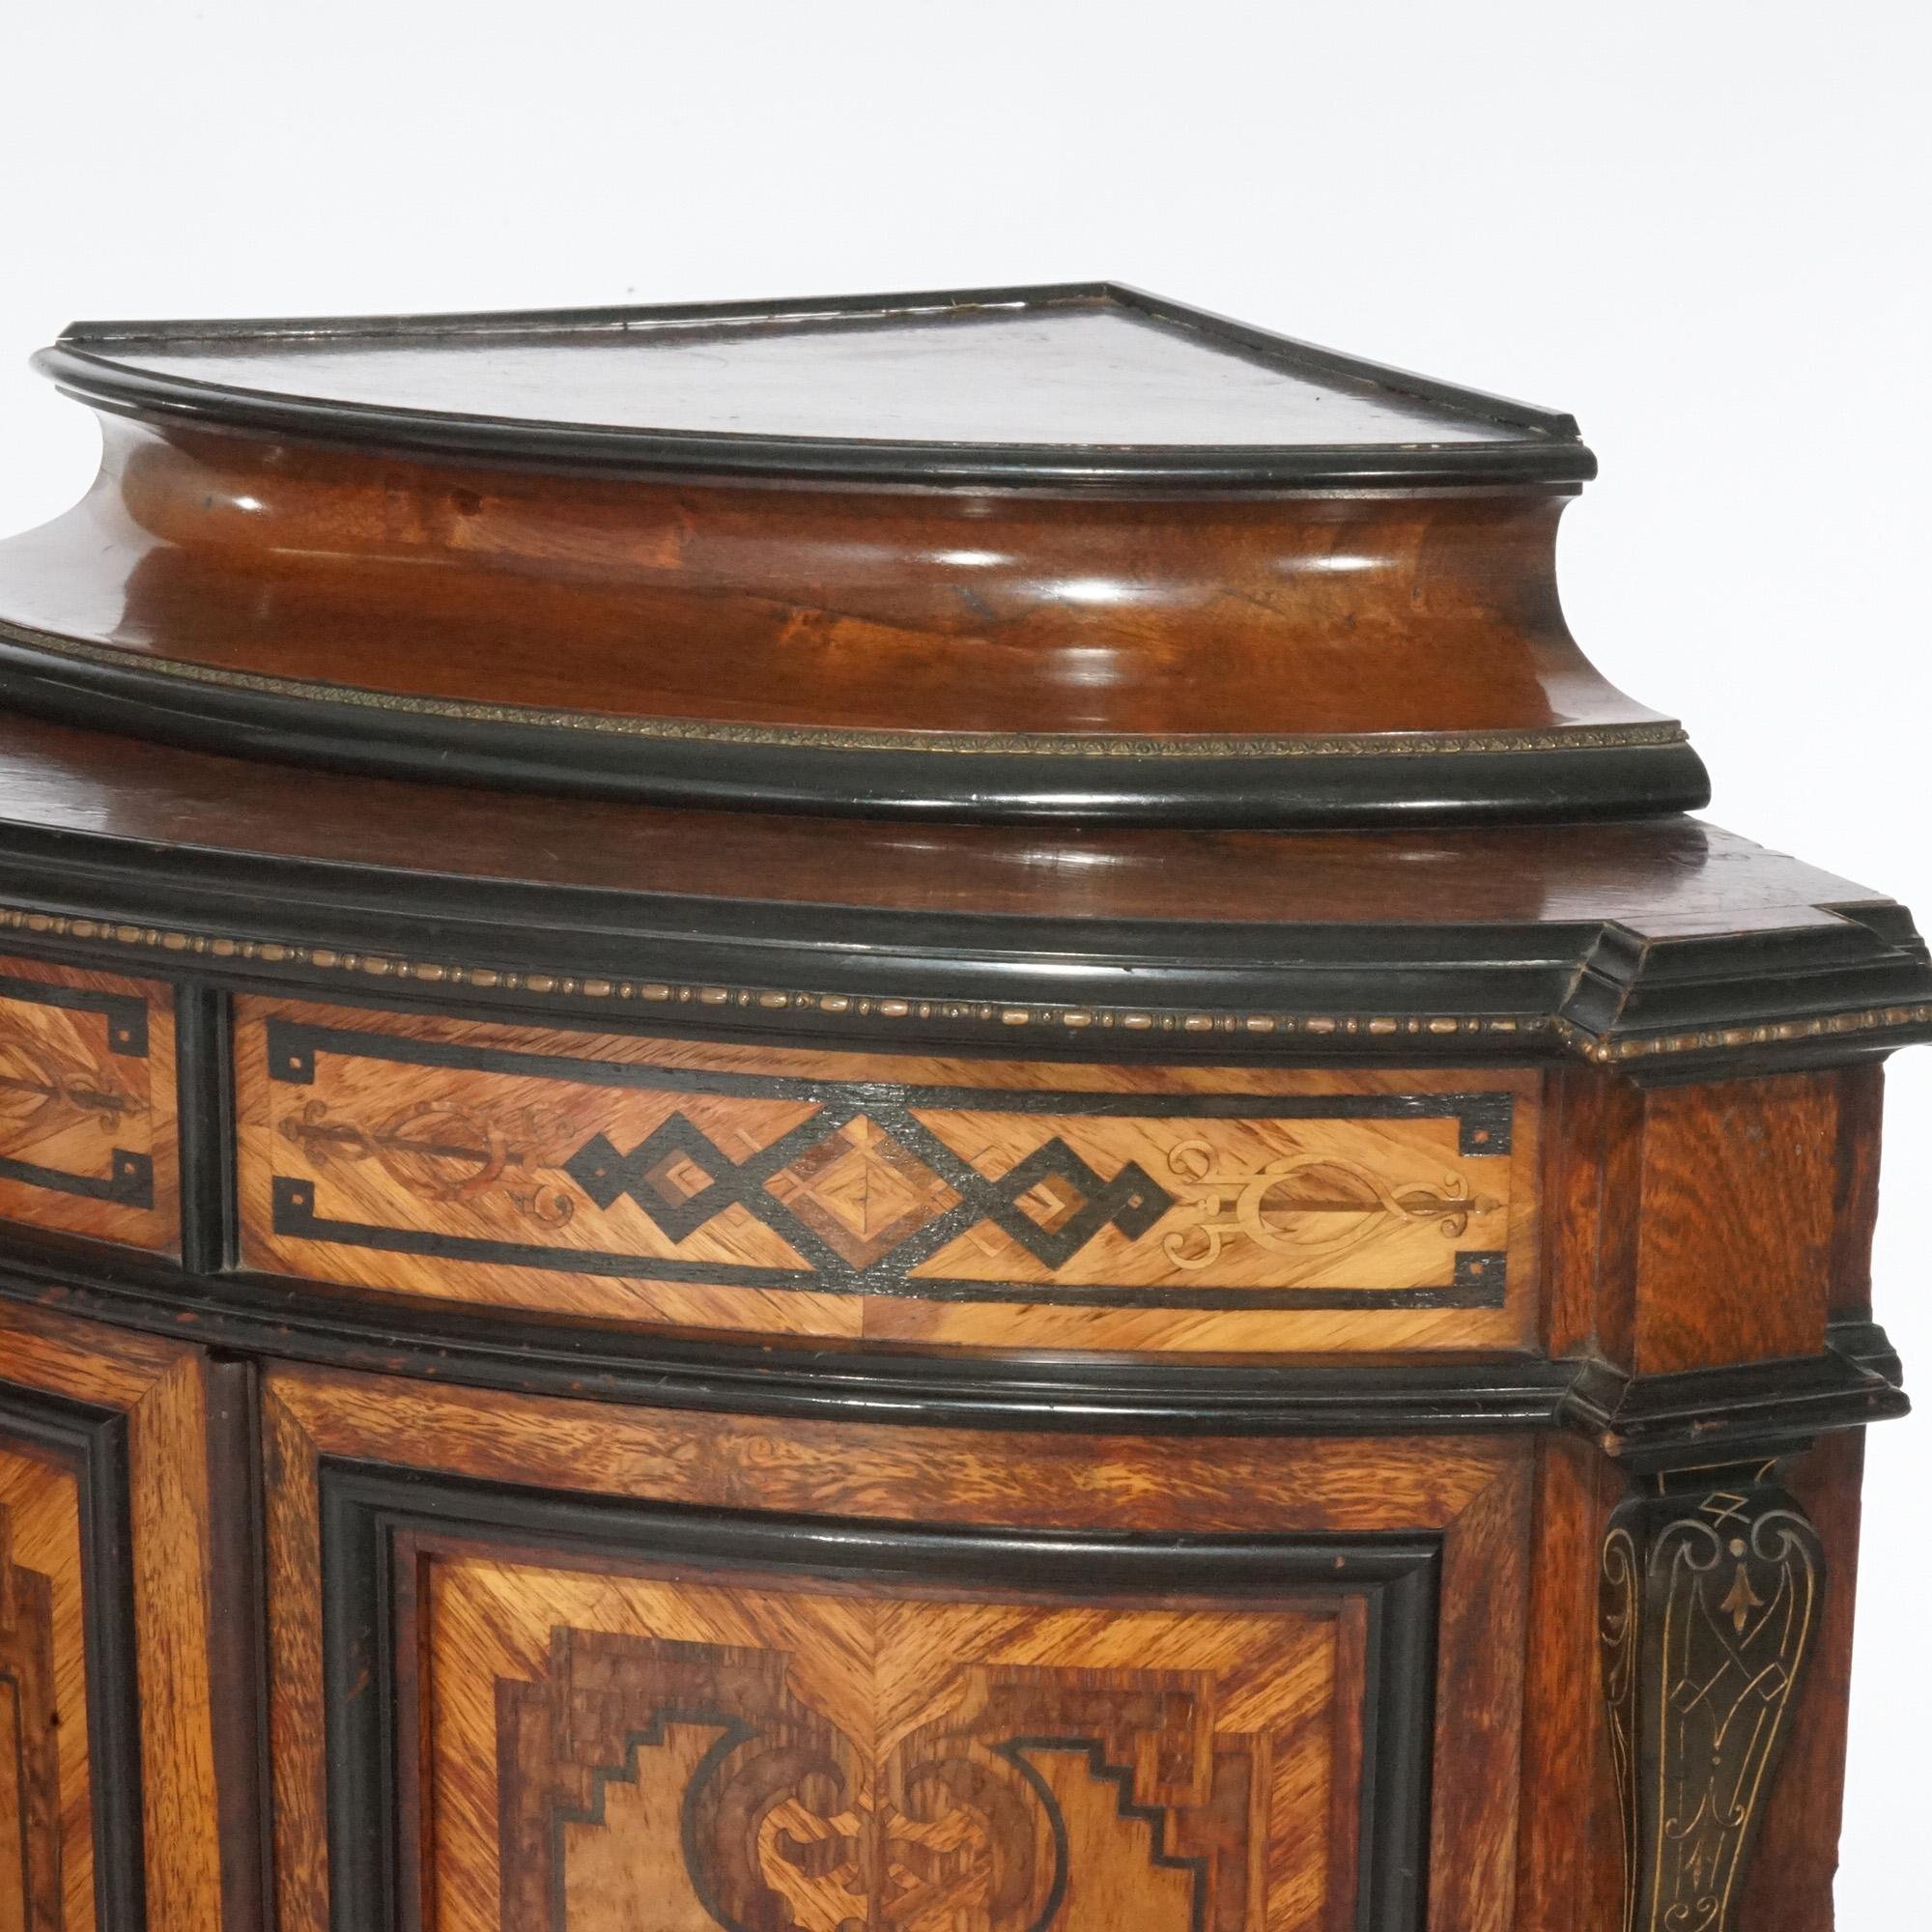 19th Century Antique Renaissance Revival Aesthetic Rosewood & Marquetry Corner Cabinet, C1880 For Sale